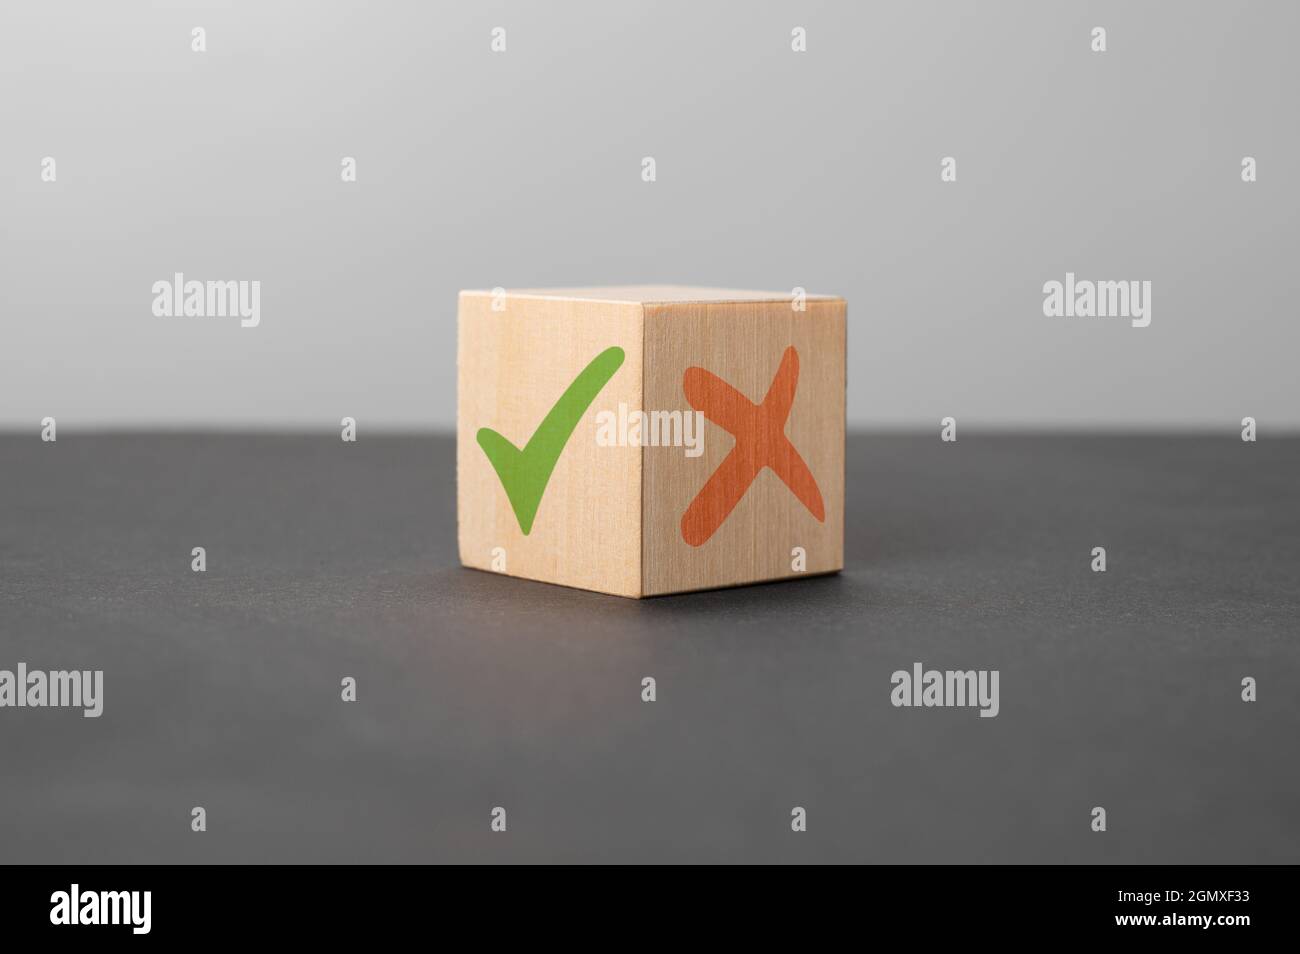 pros and cons concept. Wooden cube with image of pros versus cons. Concept of positive or negative decision making or choice of approval or rejection. Stock Photo